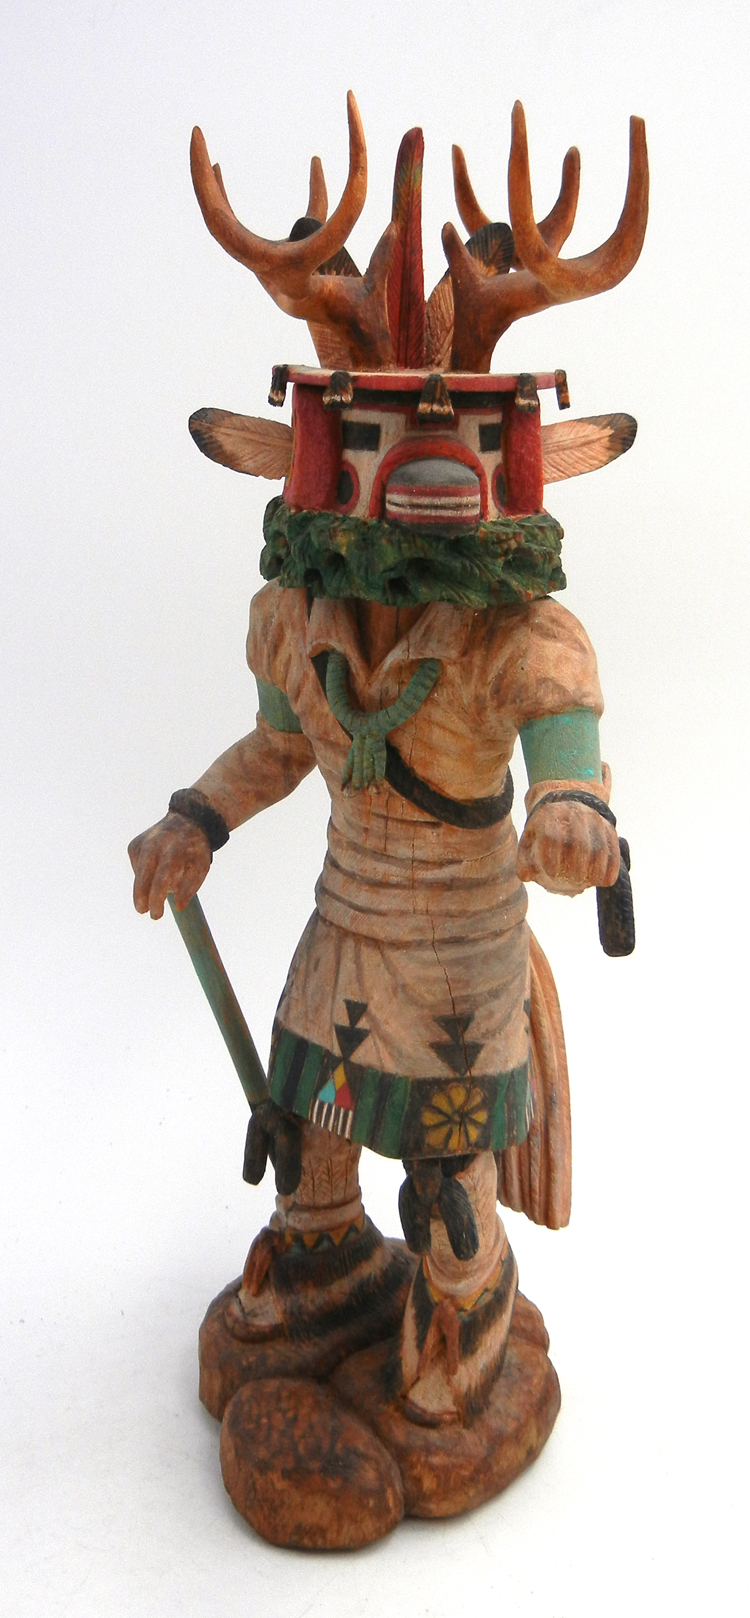 Hopi one piece deer dancer kachina doll by Malcolm Fred